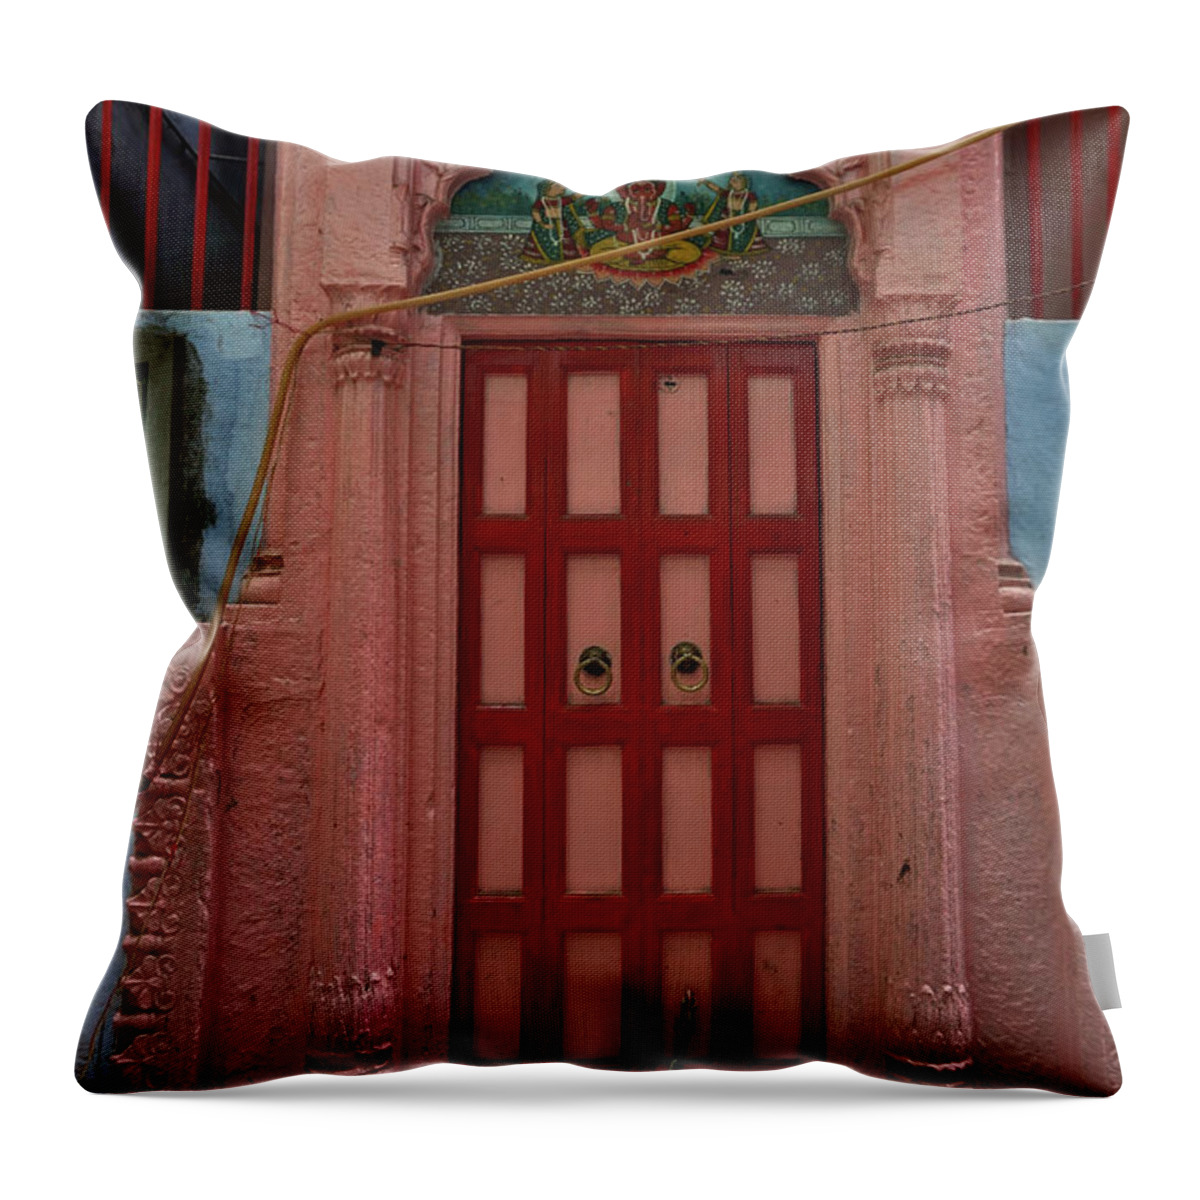 Description Throw Pillow featuring the photograph Old Doors India, Varanasi #6 by Stereostok